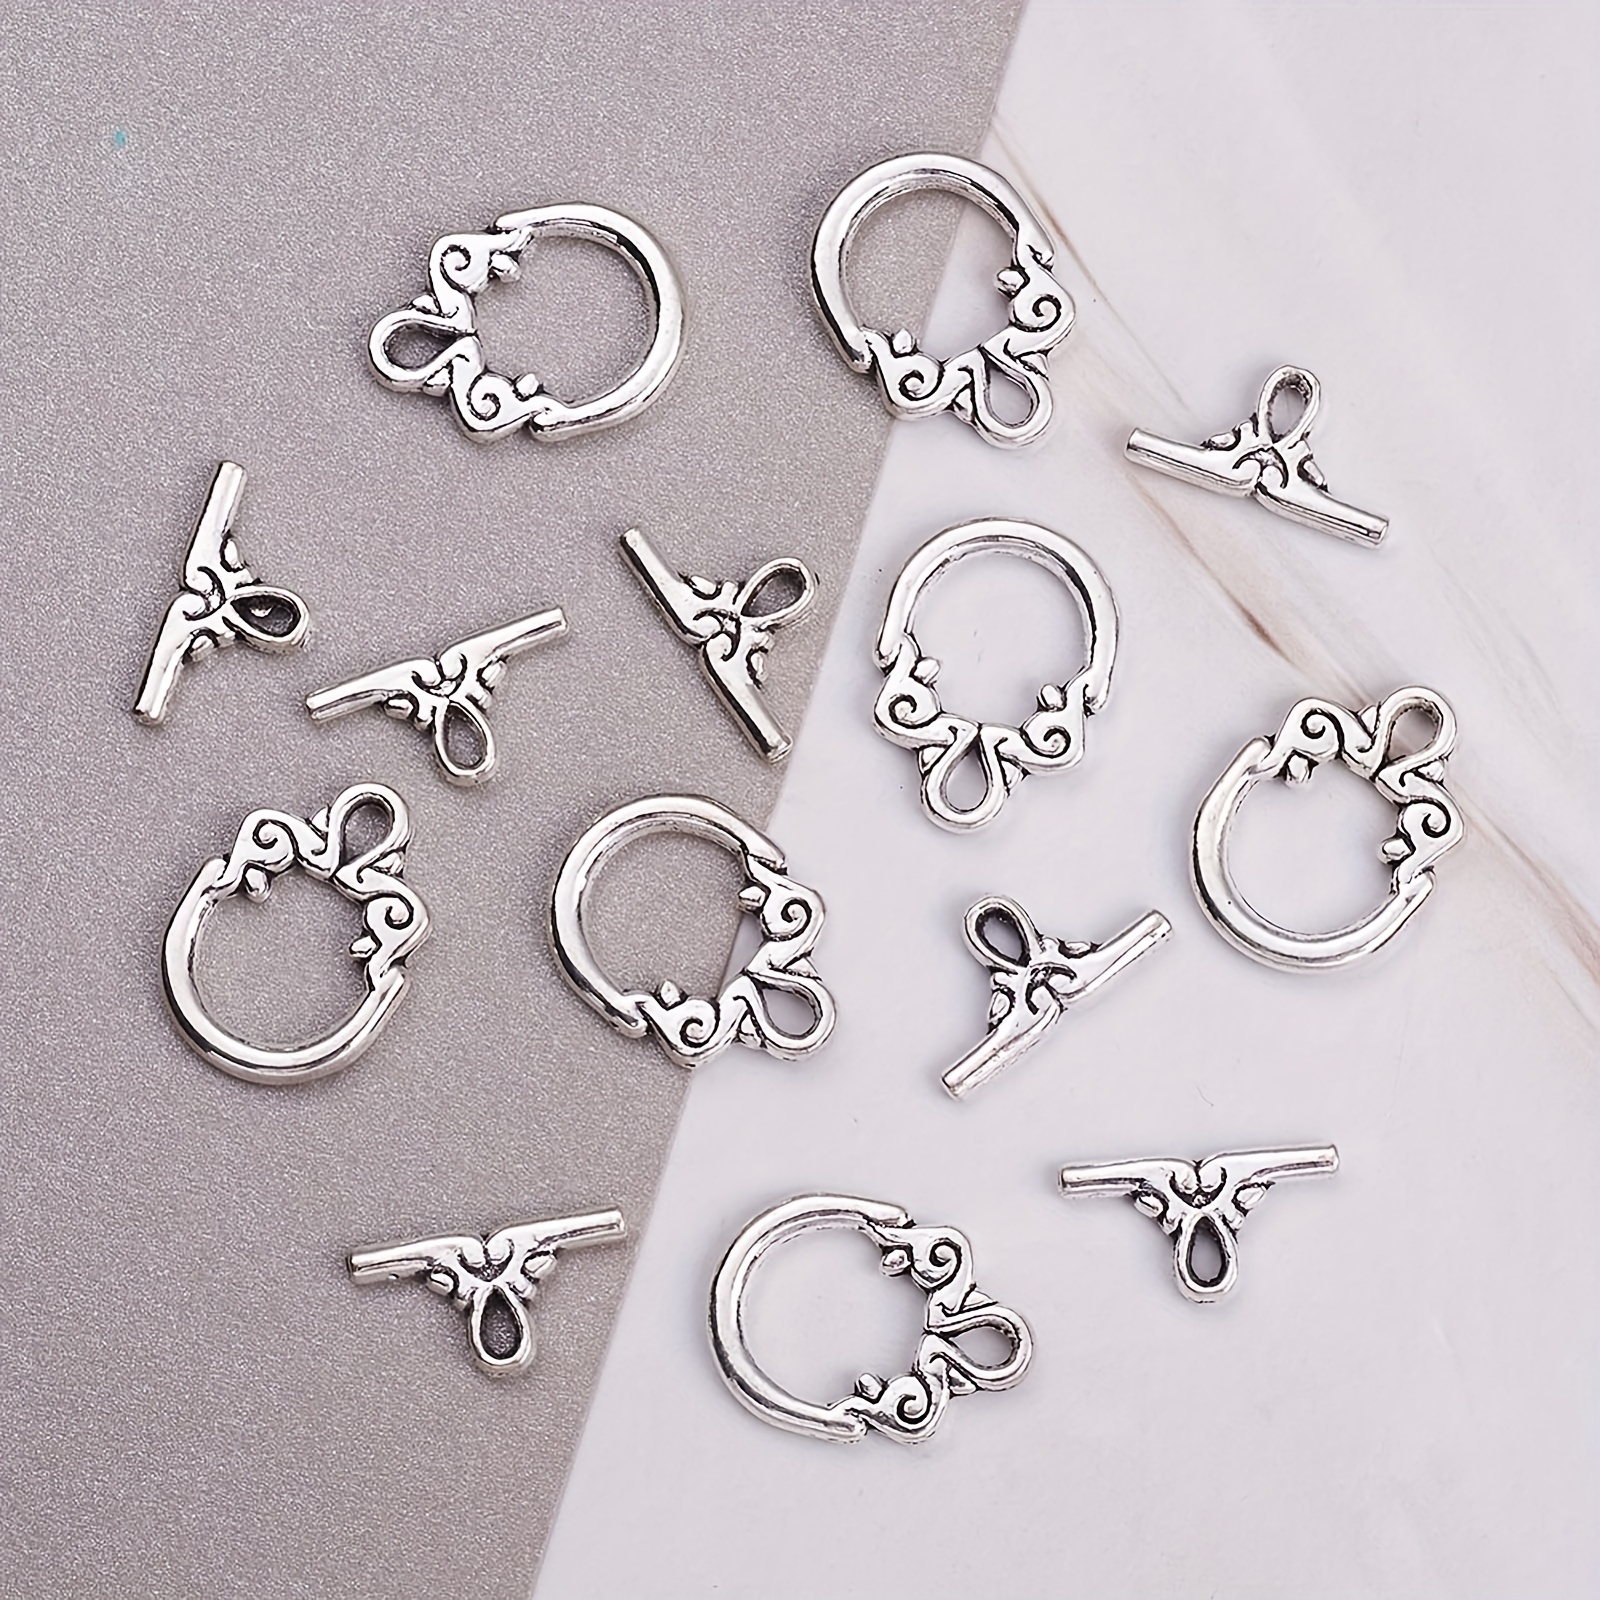 Toggle Clasps Silver, T Bar Ring, Large Silver Plated Jewelry Clasp,  Necklace Clasps, Bracelet Clasp, Closures for Necklaces Bracelets 